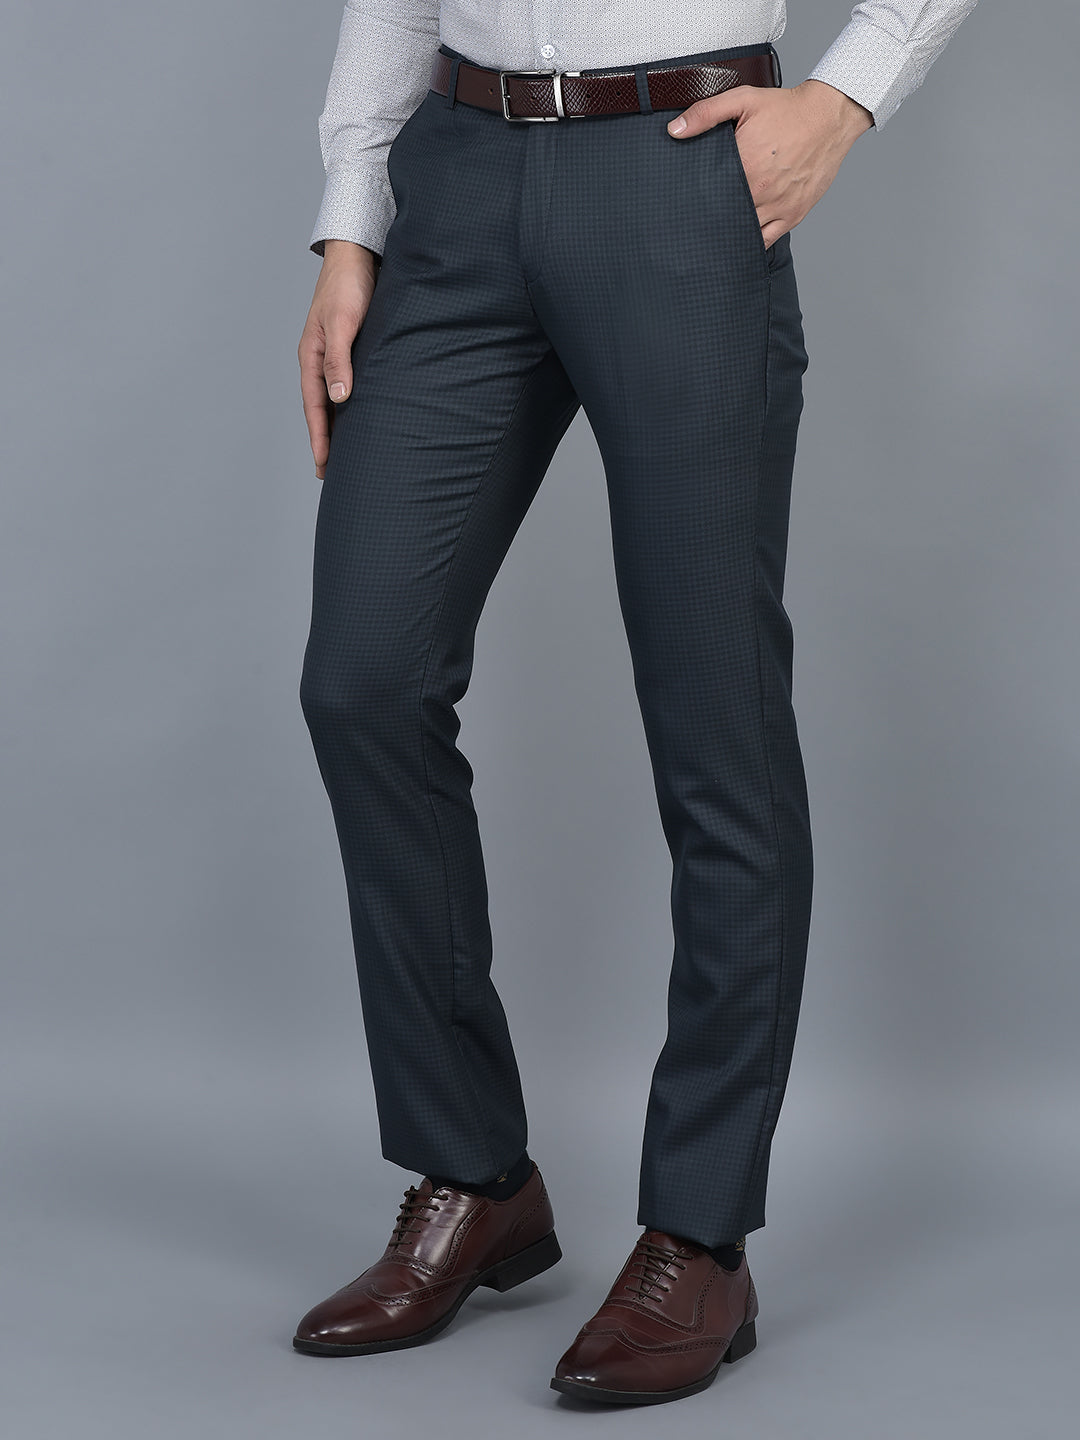 Cotton Navy Blue Ladies Formal Pant at Rs 295/piece in New Delhi